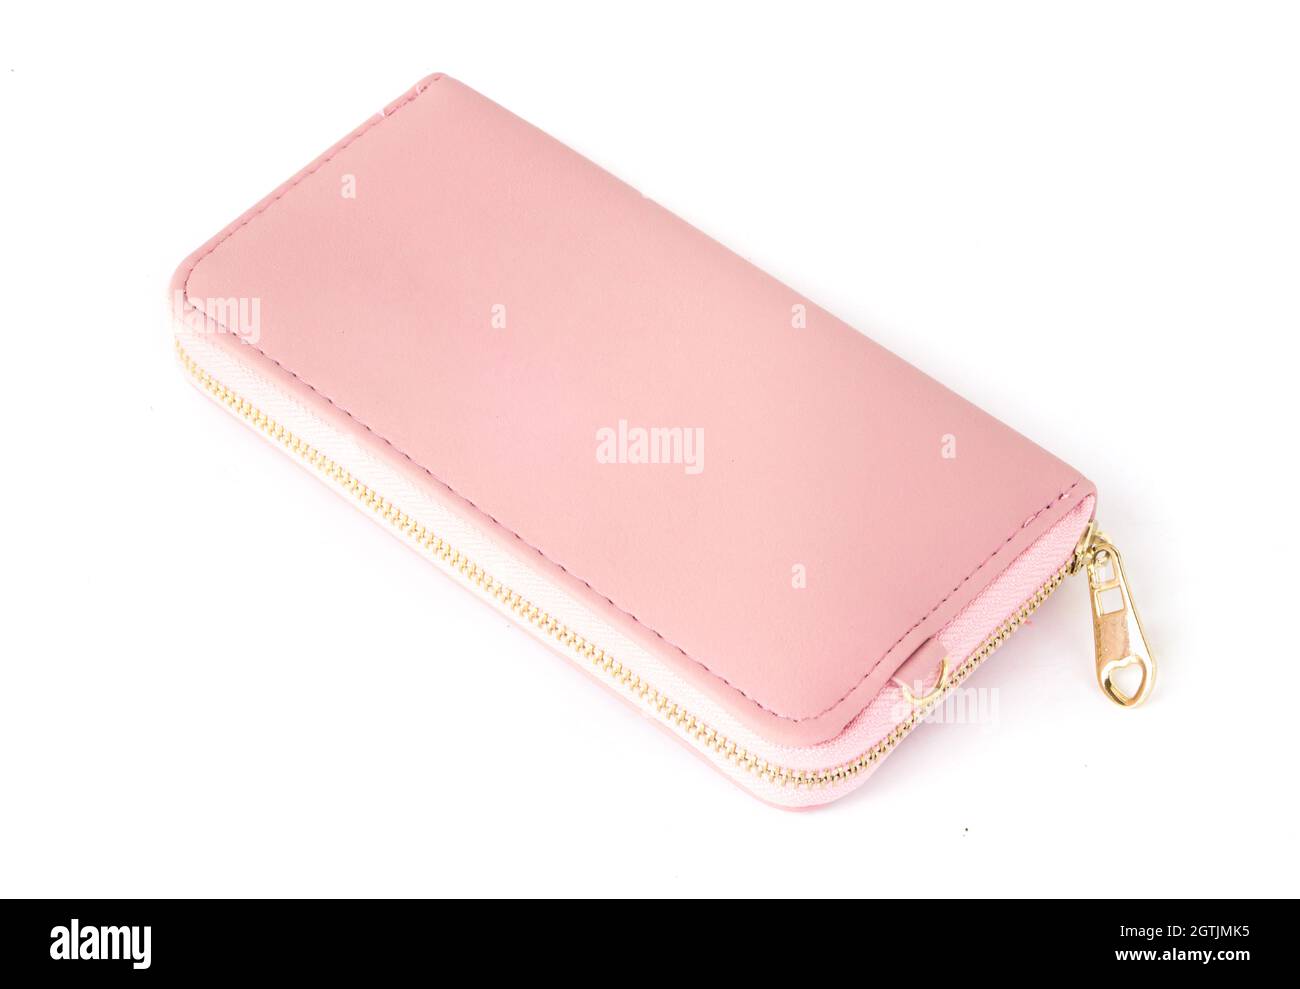 High Angle View Of Pink Purse Over White Background Stock Photo